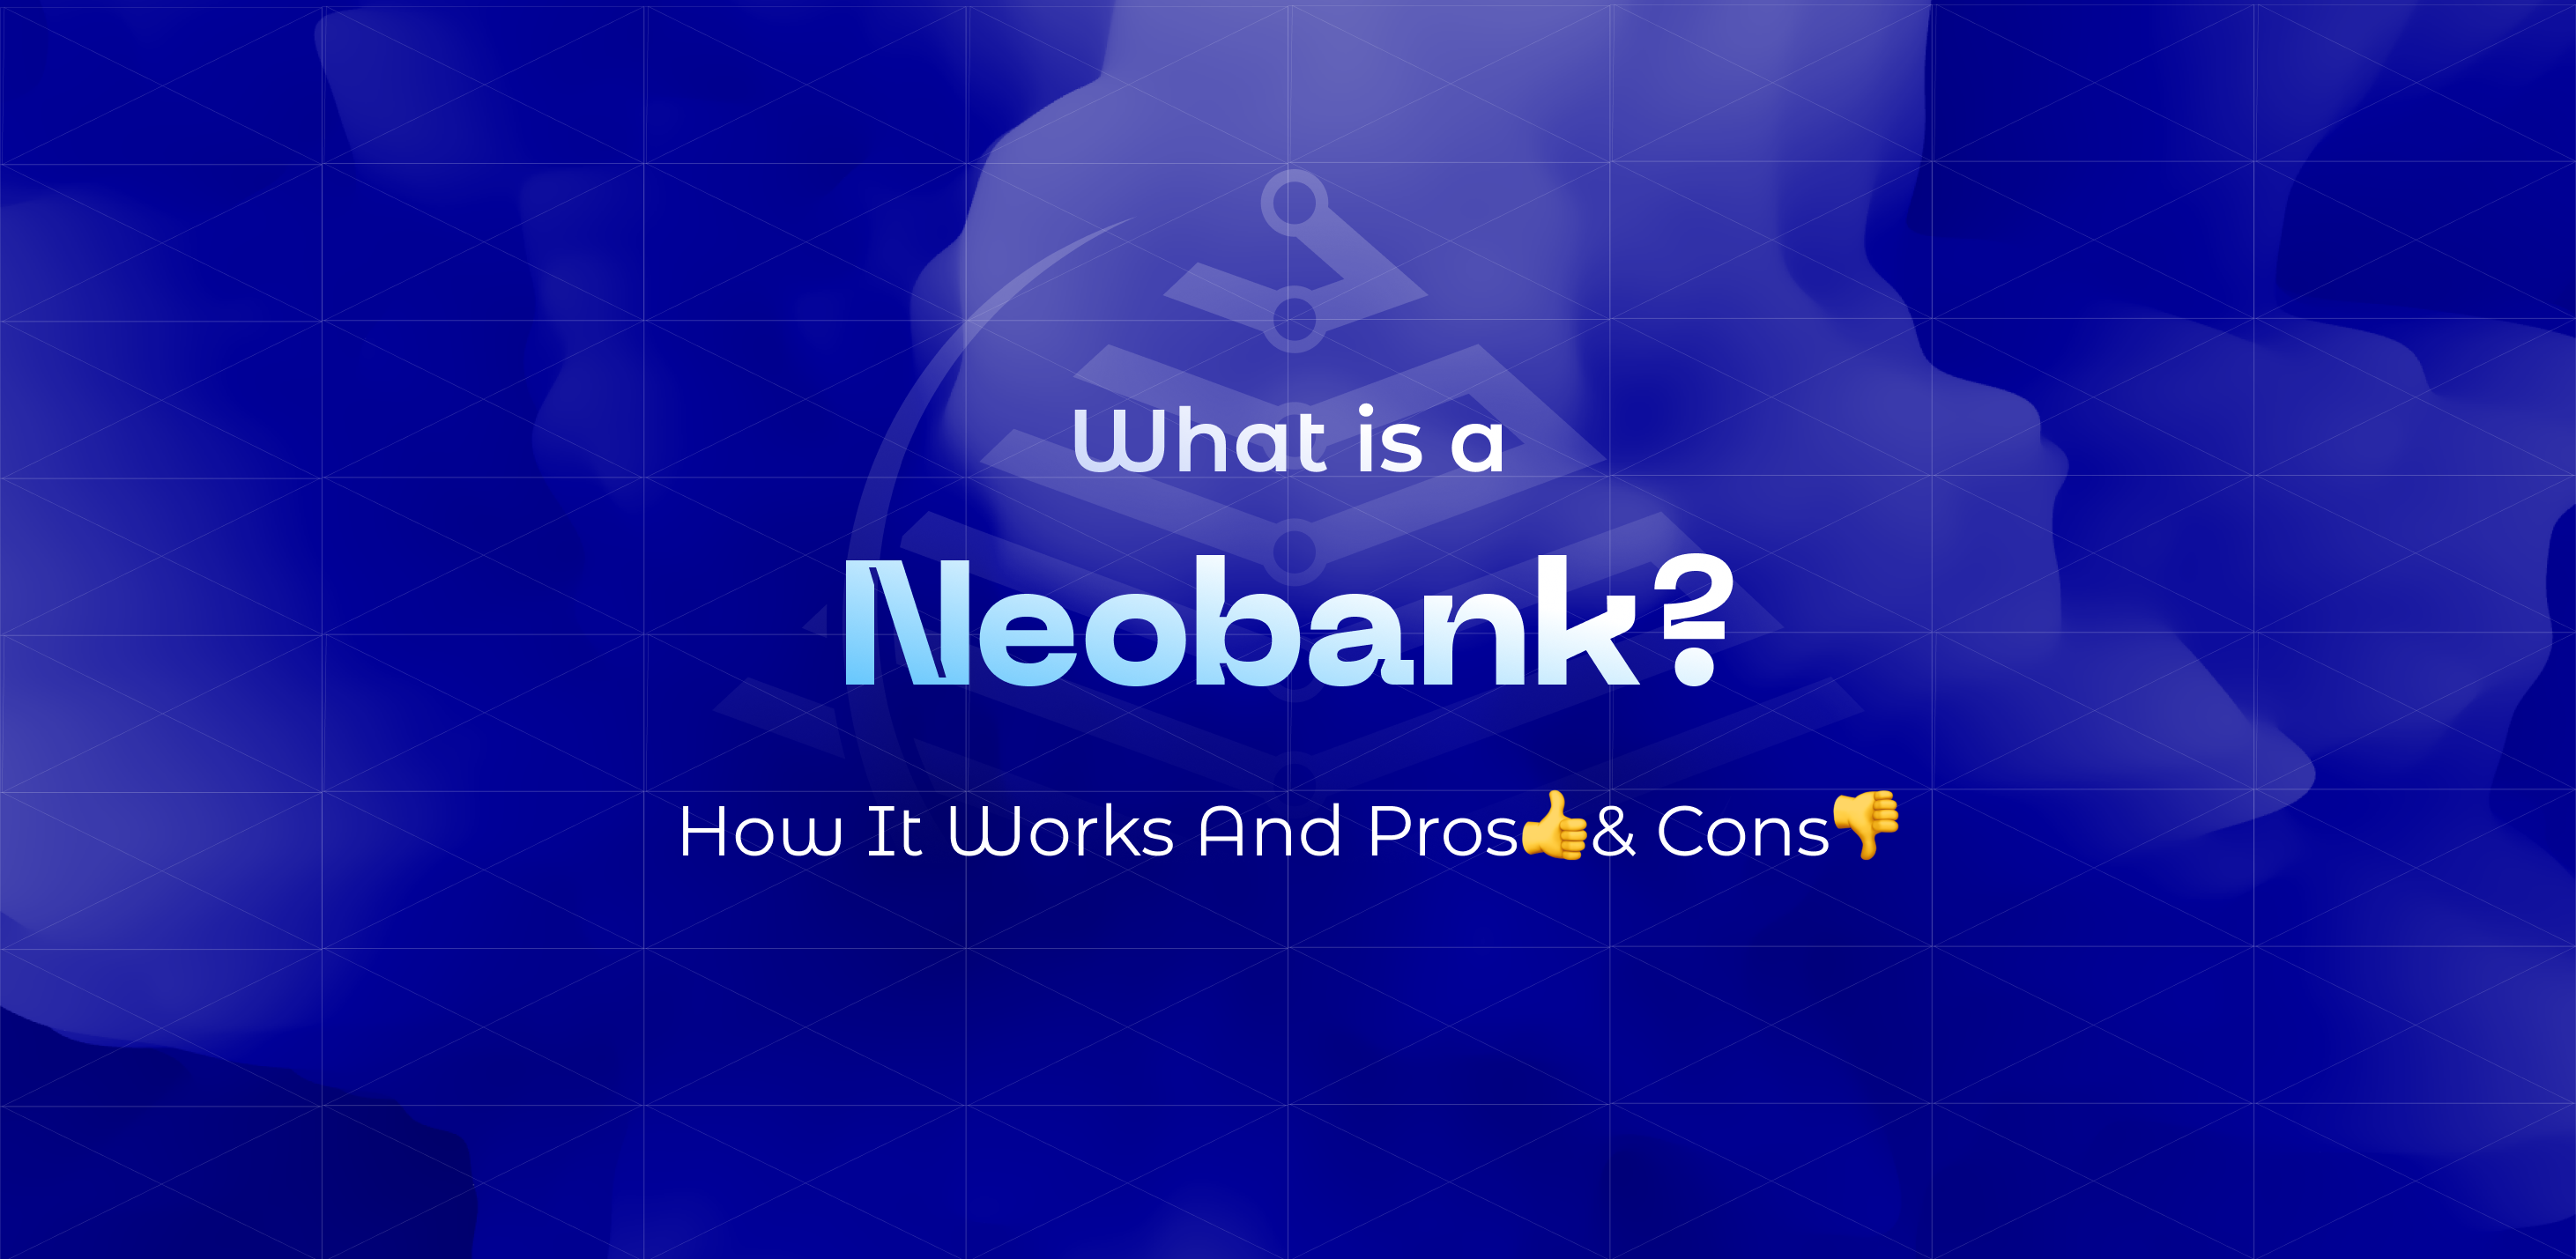 What is a Neobank? How It Works And Pros & Cons